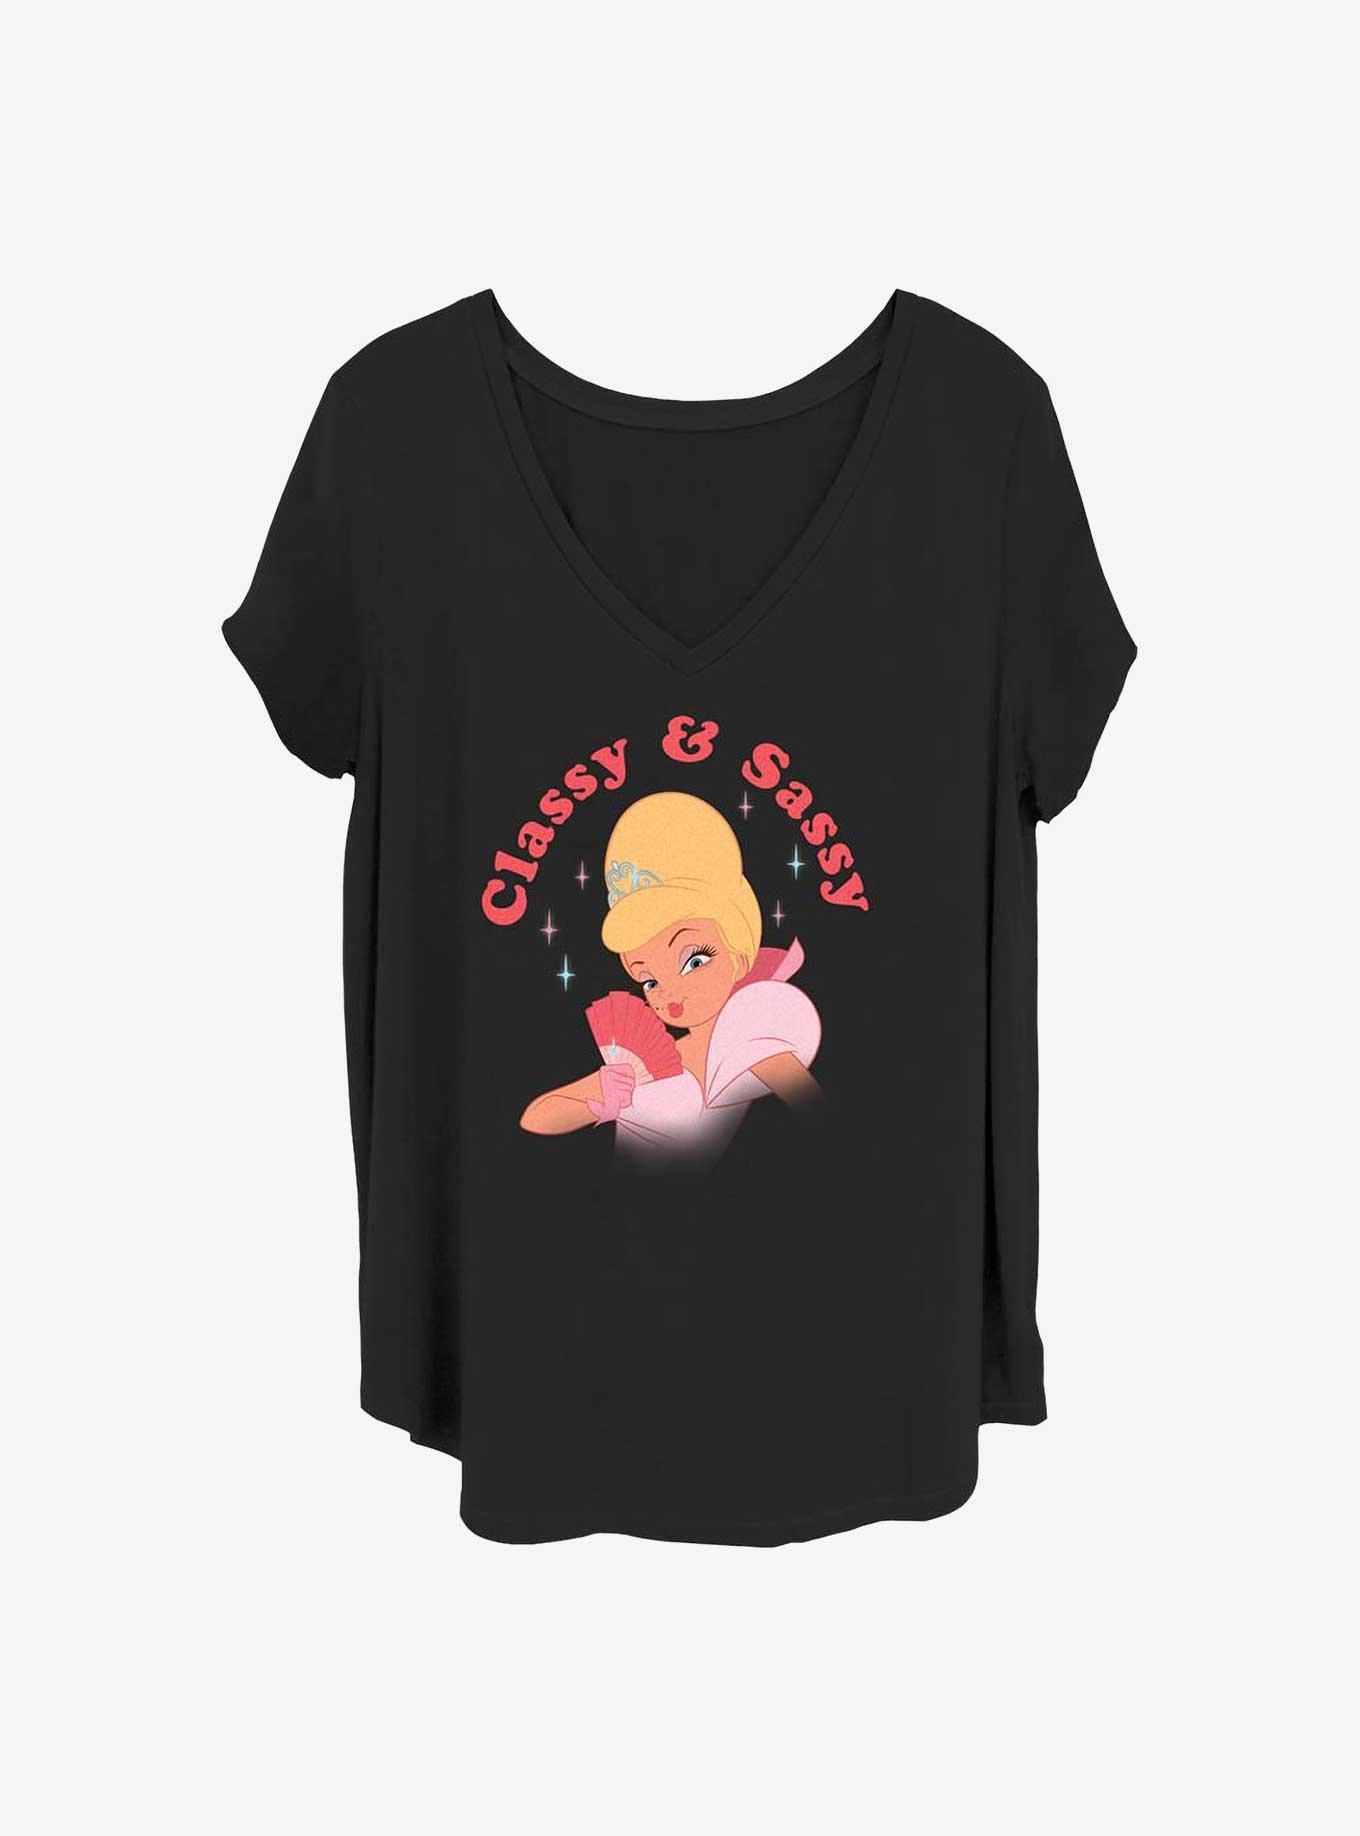 Disney The Princess and the Frog Classy Charlotte Girls T-Shirt Plus Size, BLACK, hi-res